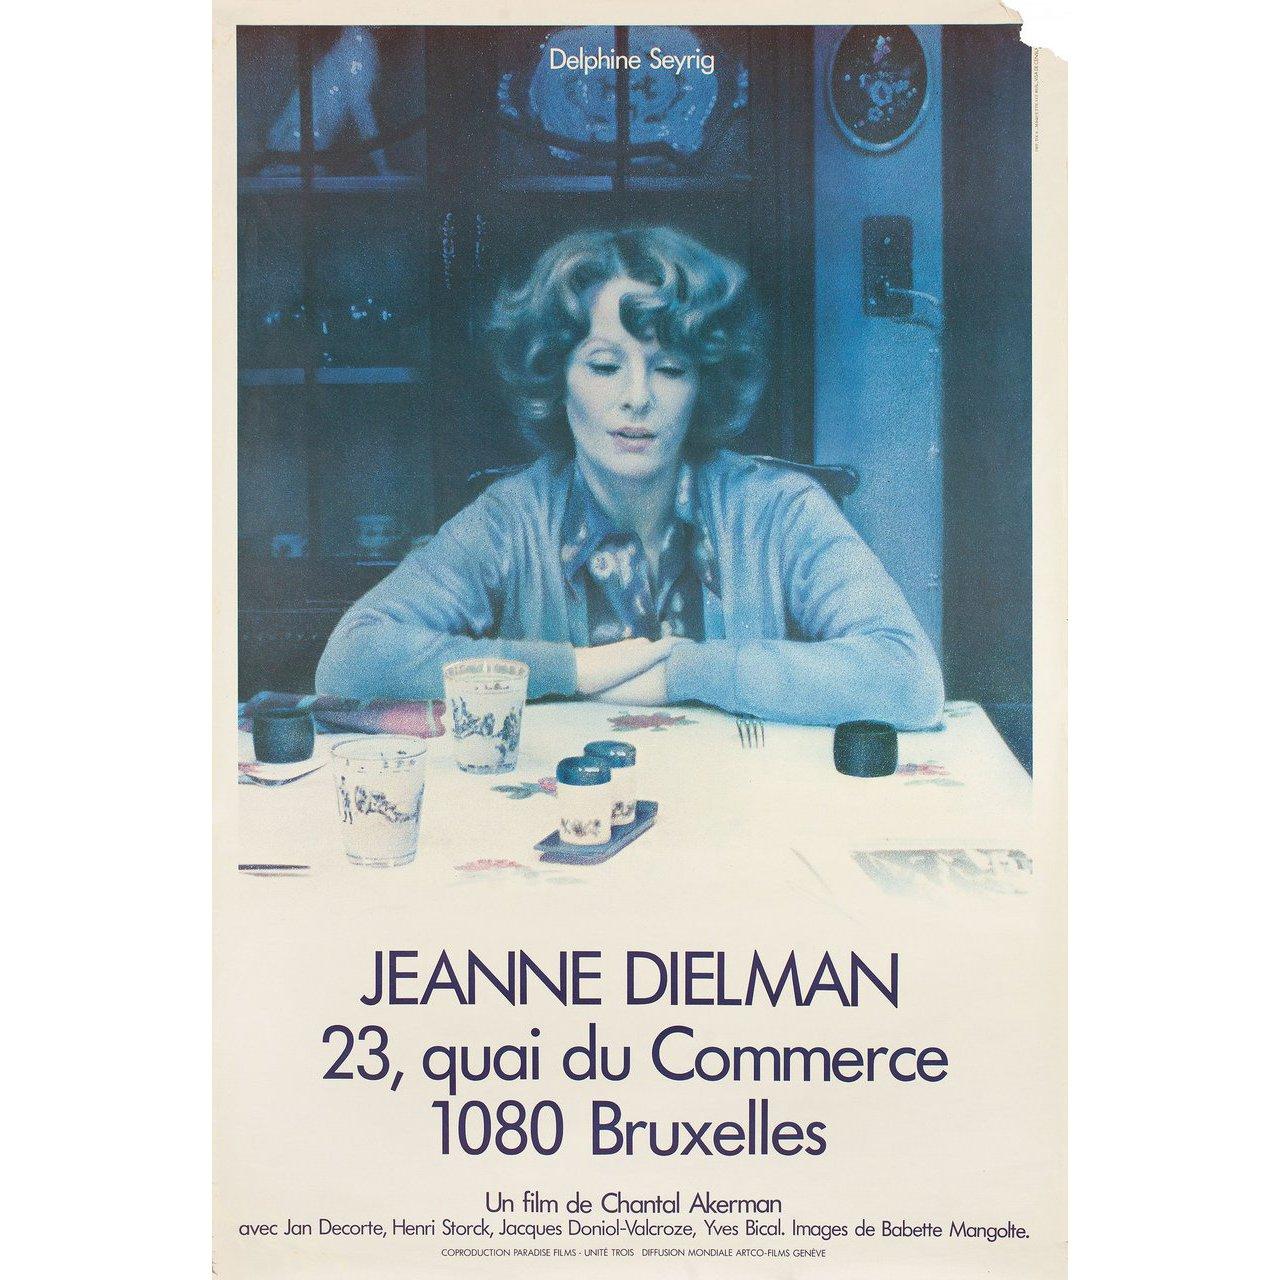 Original 1975 French half grande poster for the film Jeanne Dielman, 23, Quai du Commerce 1080 Bruxelles directed by Chantal Akerman with Delphine Seyrig / Jan Decorte / Henri Storck / Jacques Doniol-Valcroze. Very Good condition, rolled w/ missing